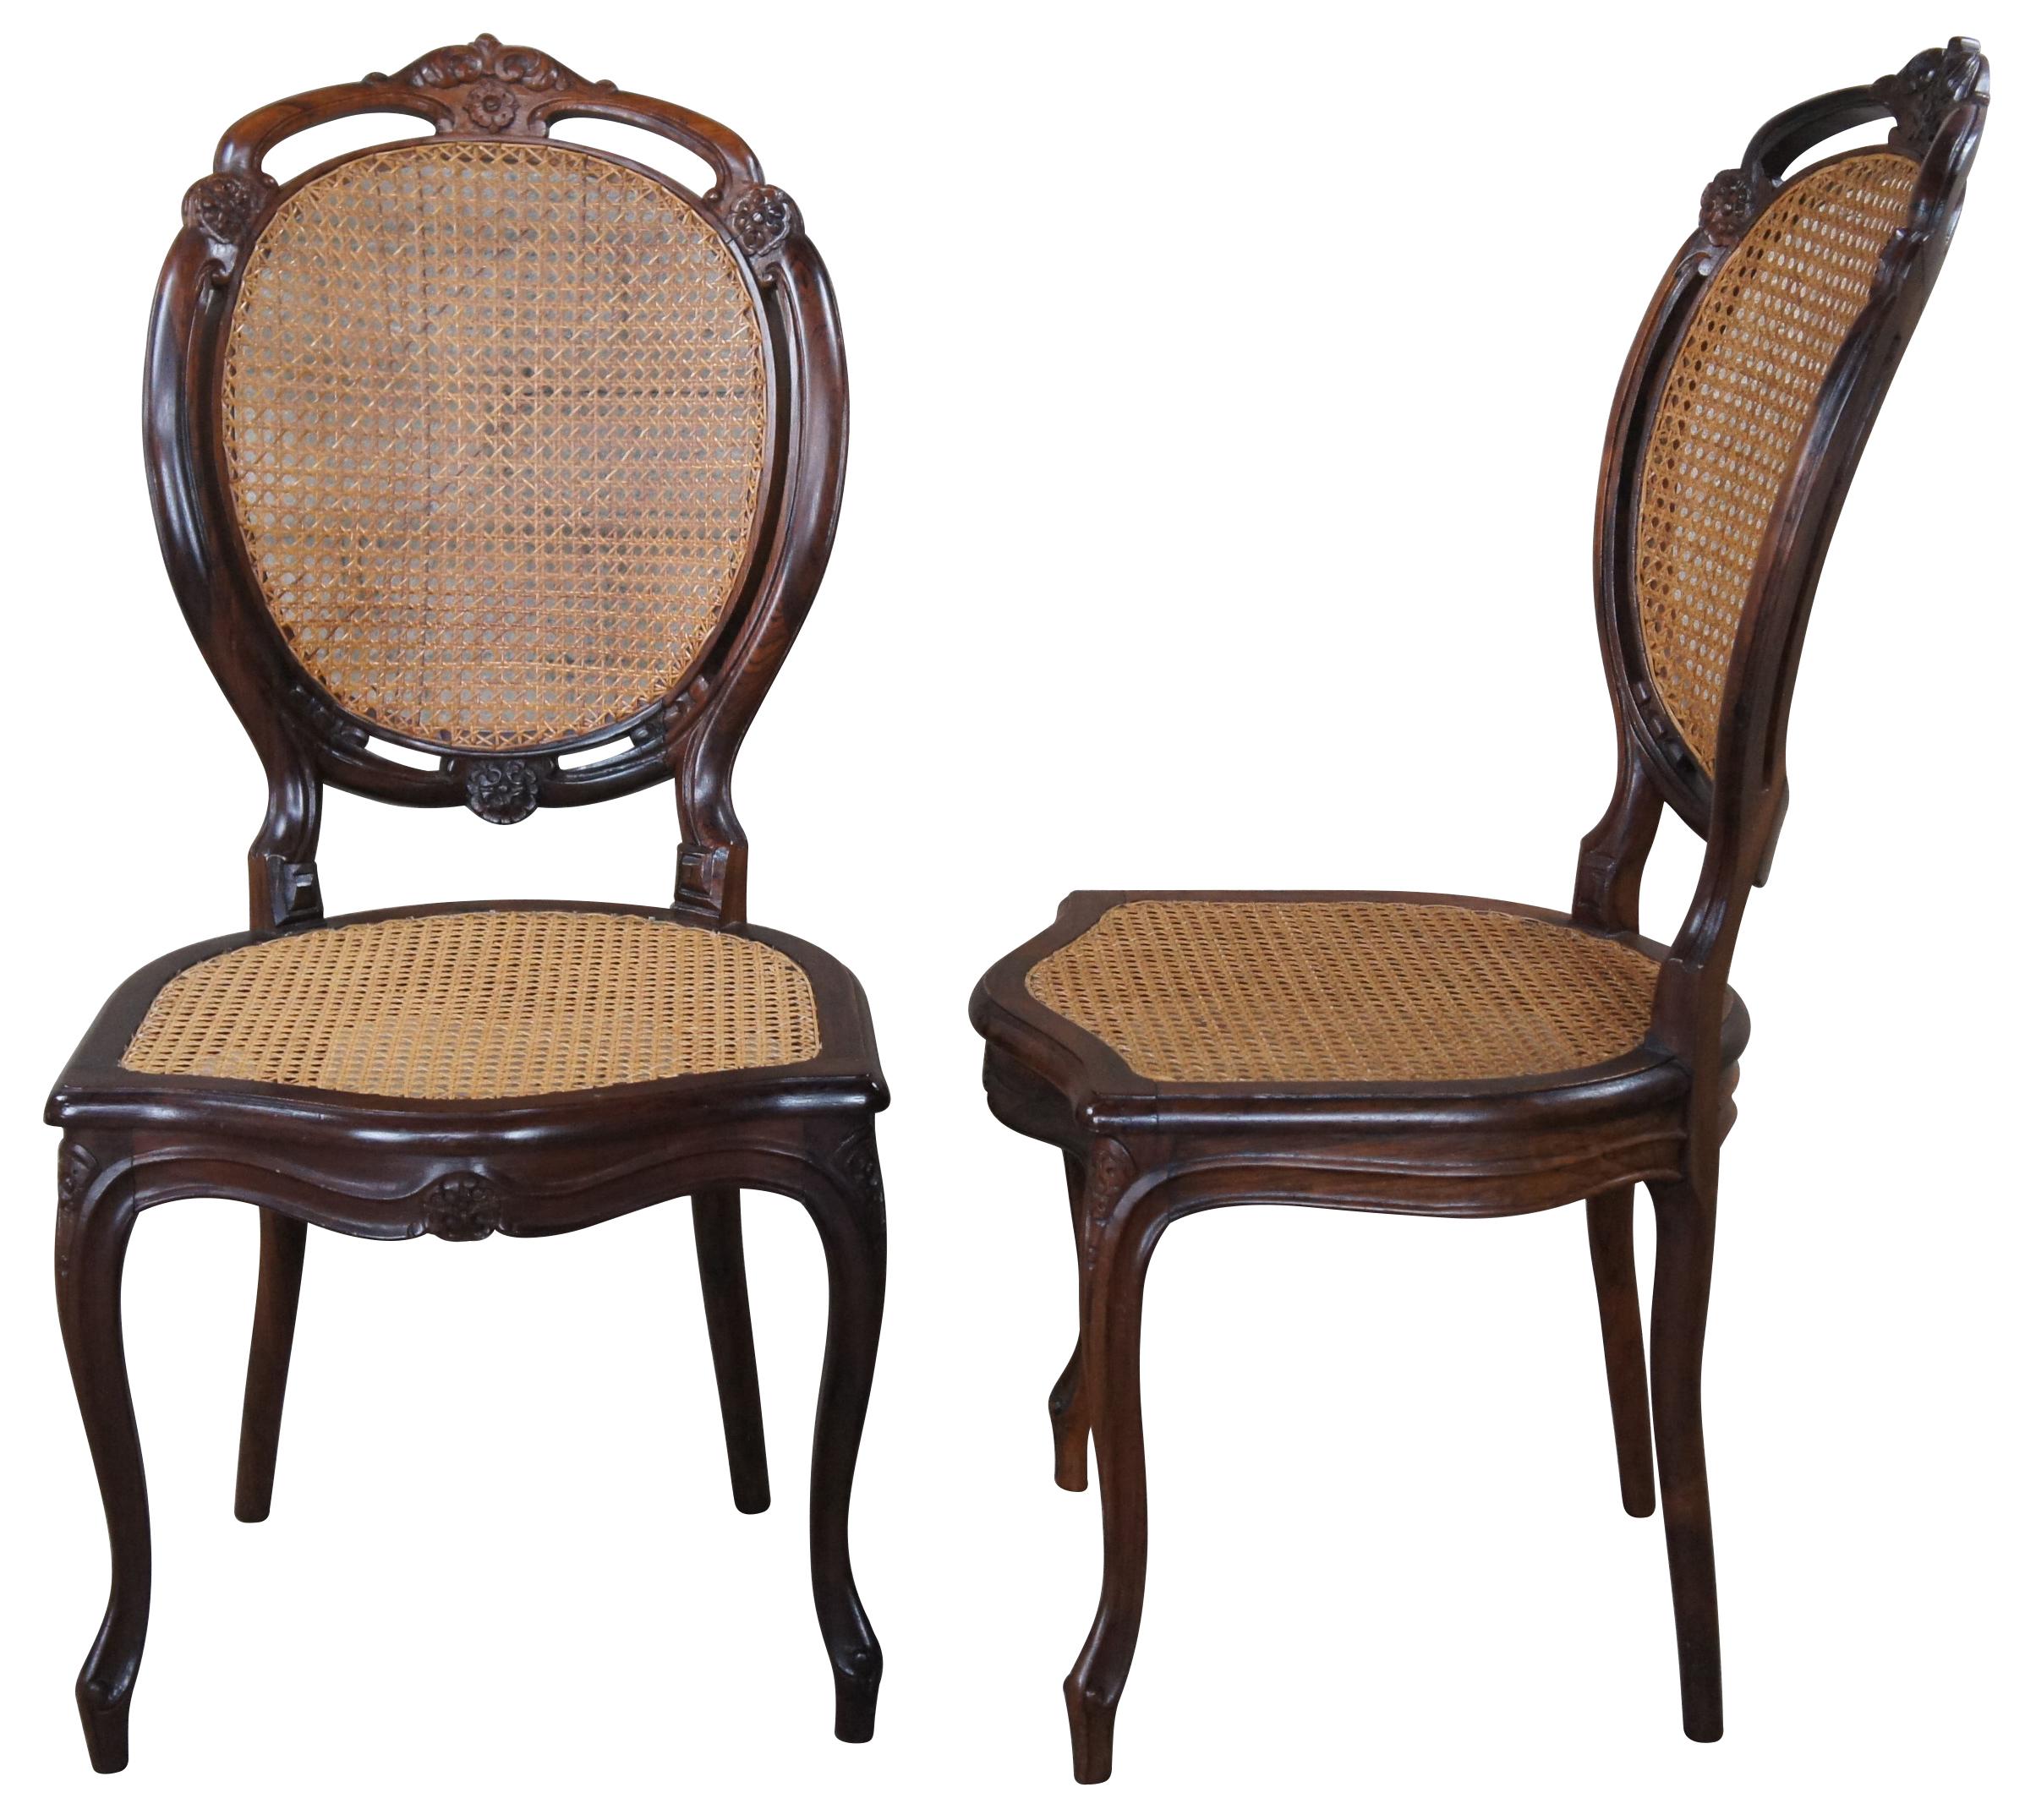 6 Mid 20th century Louis XV style balloon back dining chairs.  Made from hardwood with cane back and seat.  Features a pierced and carved seat back over cabriole legs. 
